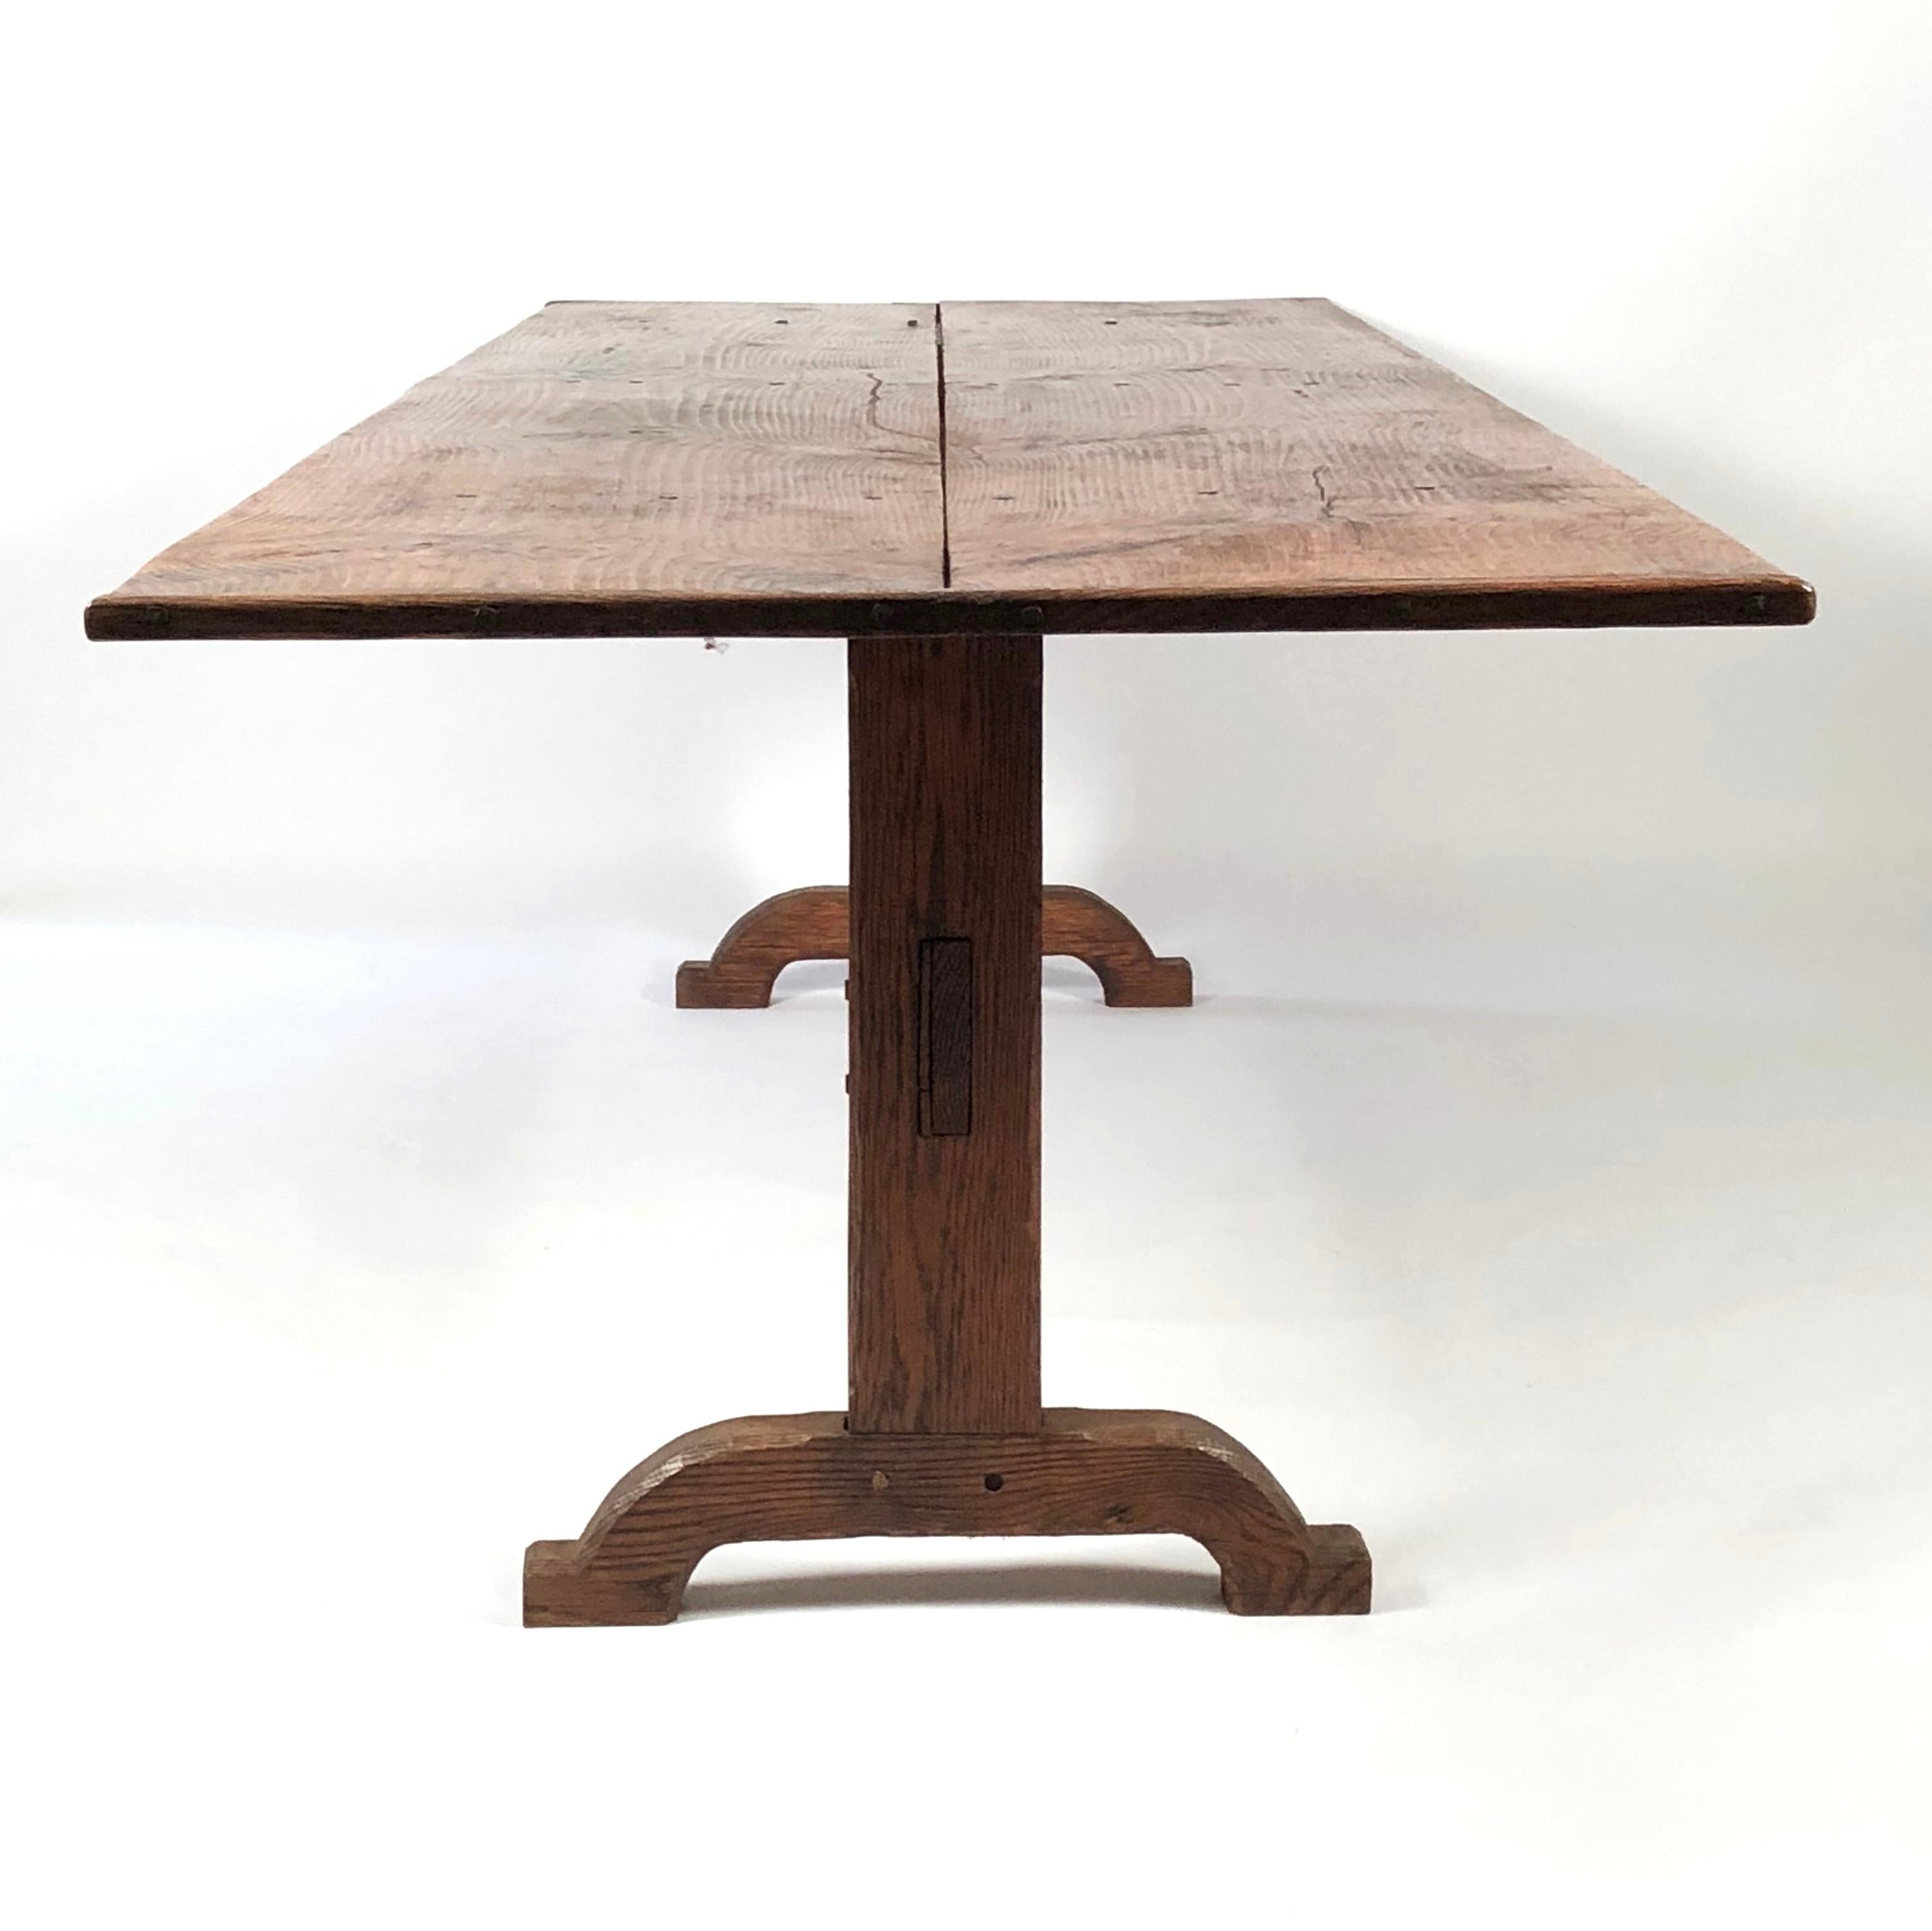 A large country farm dining table, the pine top comprised of two boards with traditional breadboard ends, supported by two oak trestle supports joined by a cross stretcher. Great proportions, with room for at least 10-12, with plenty of legroom.